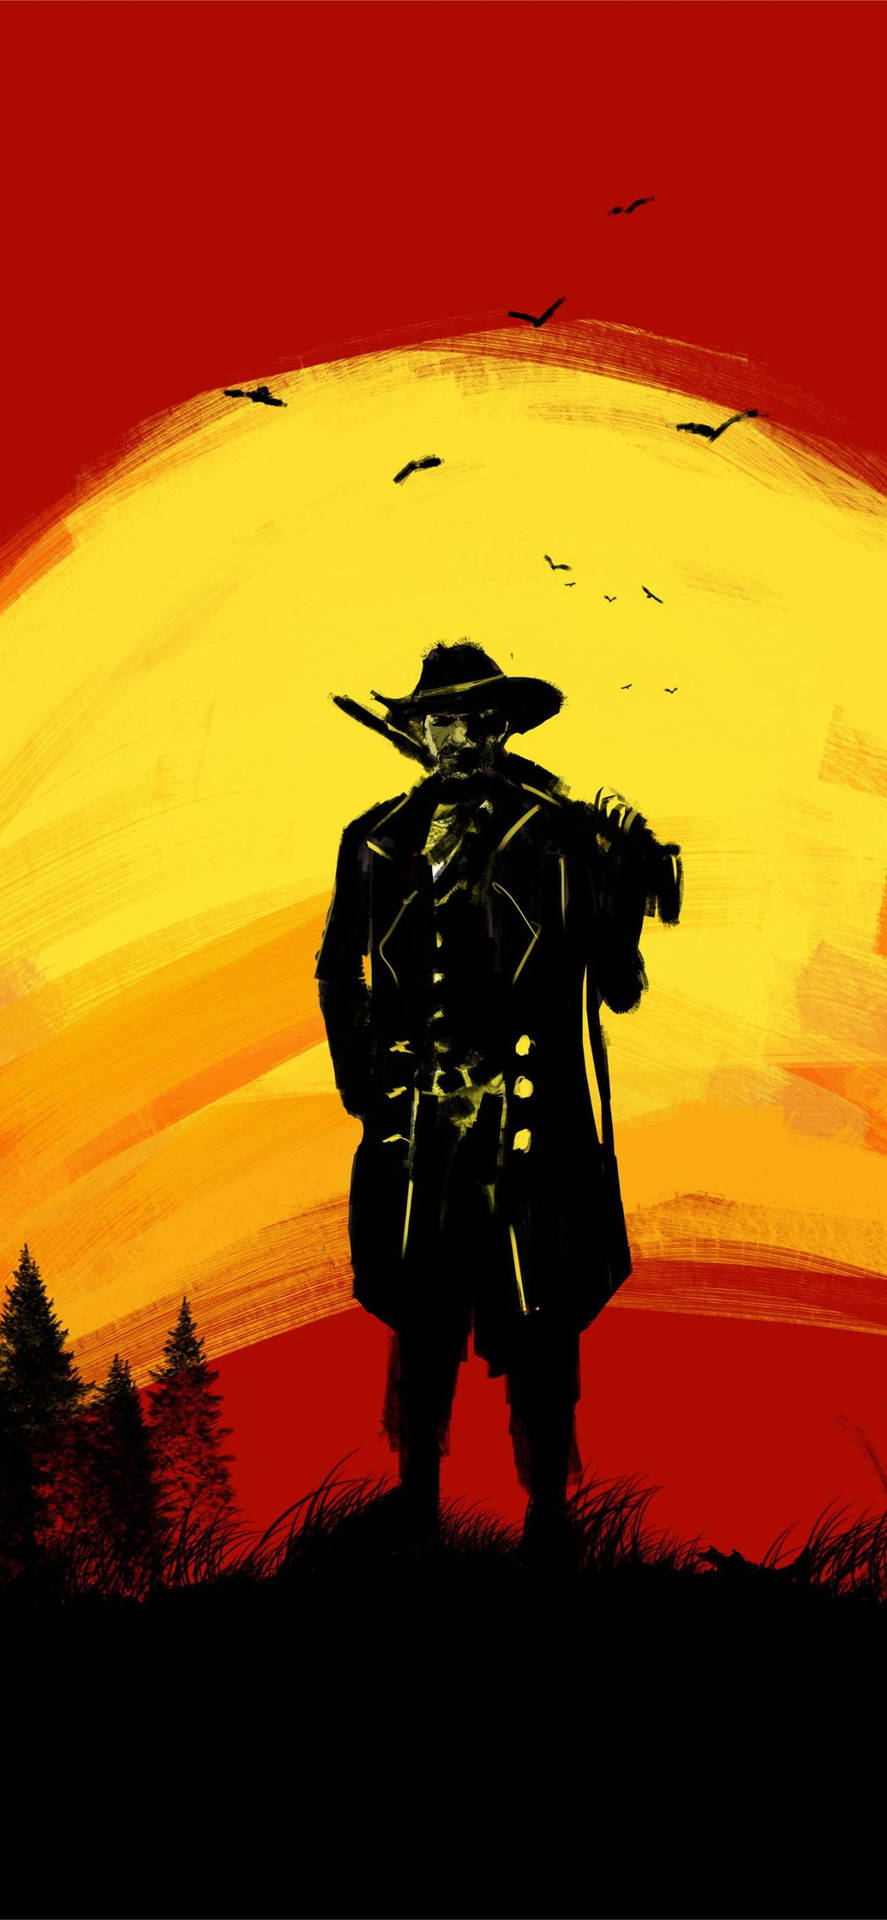 Wallpaper ID: 399038 / Video Game Red Dead Redemption 2, Red Dead Redemption,  1080x1920 Phone Wallpaper